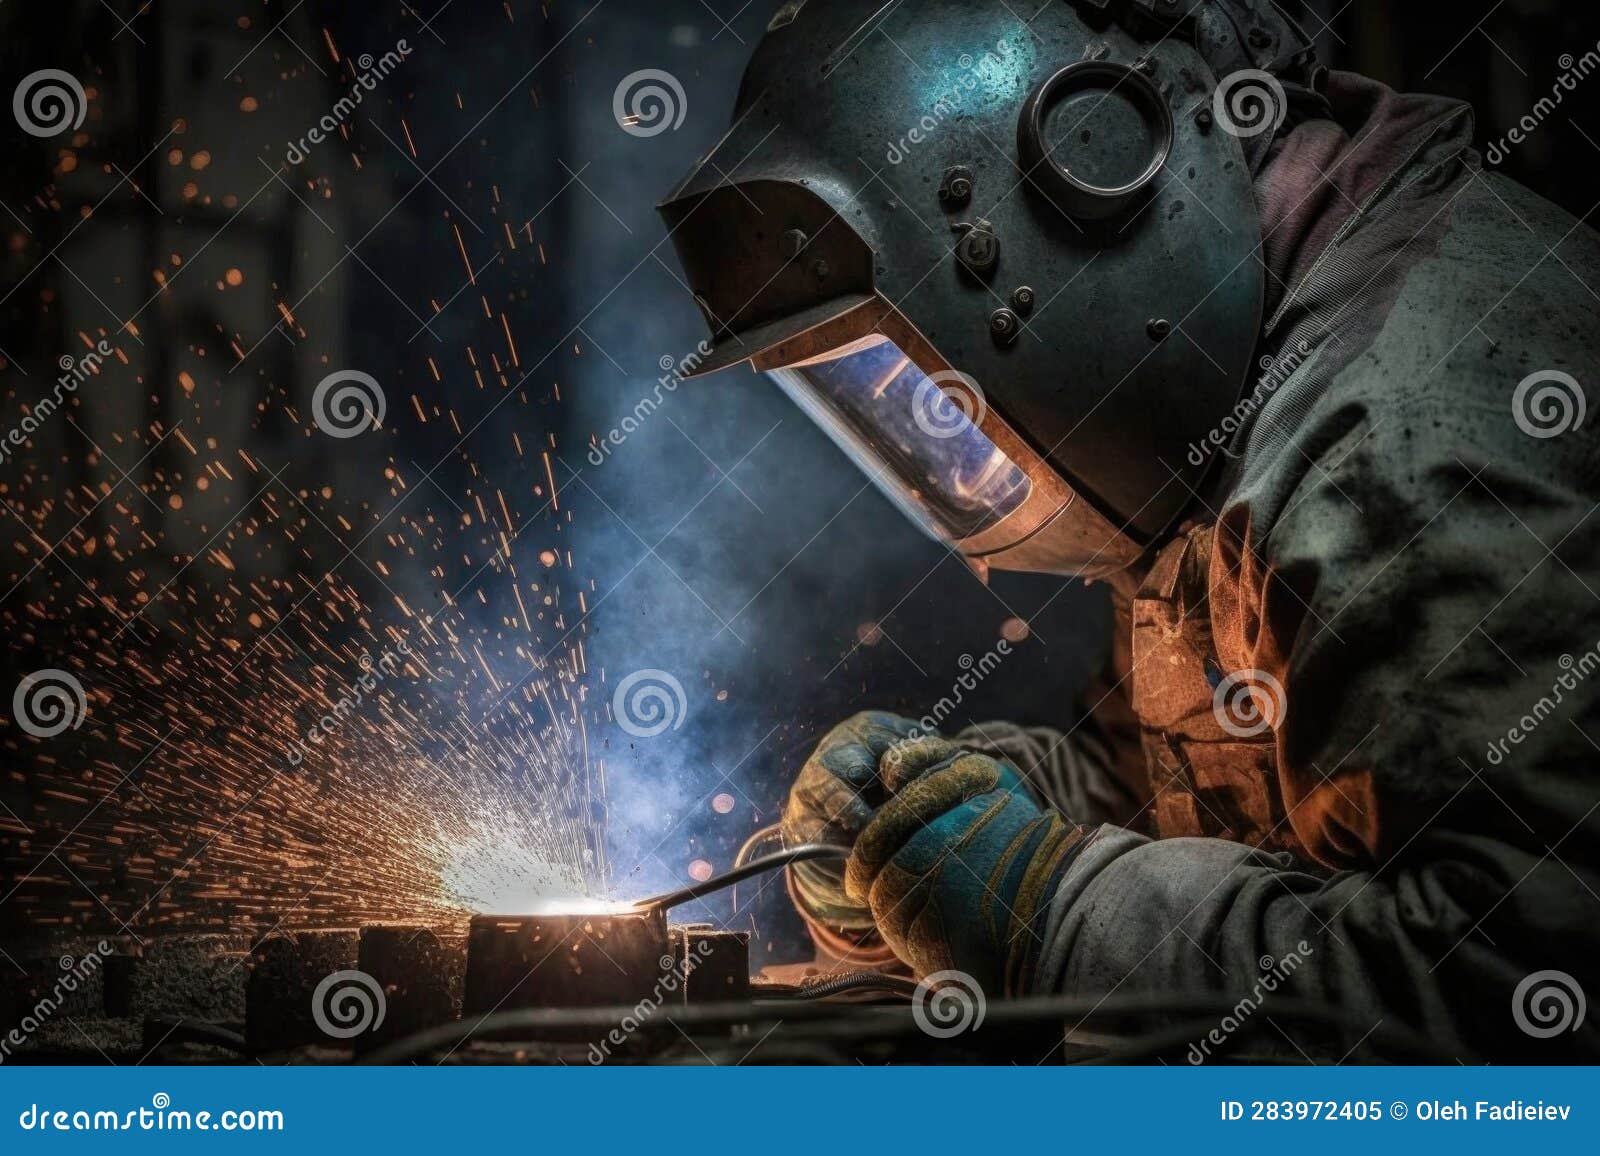 Male Welder Wearing Protective Clothing and Welding Metal with Sparks ...